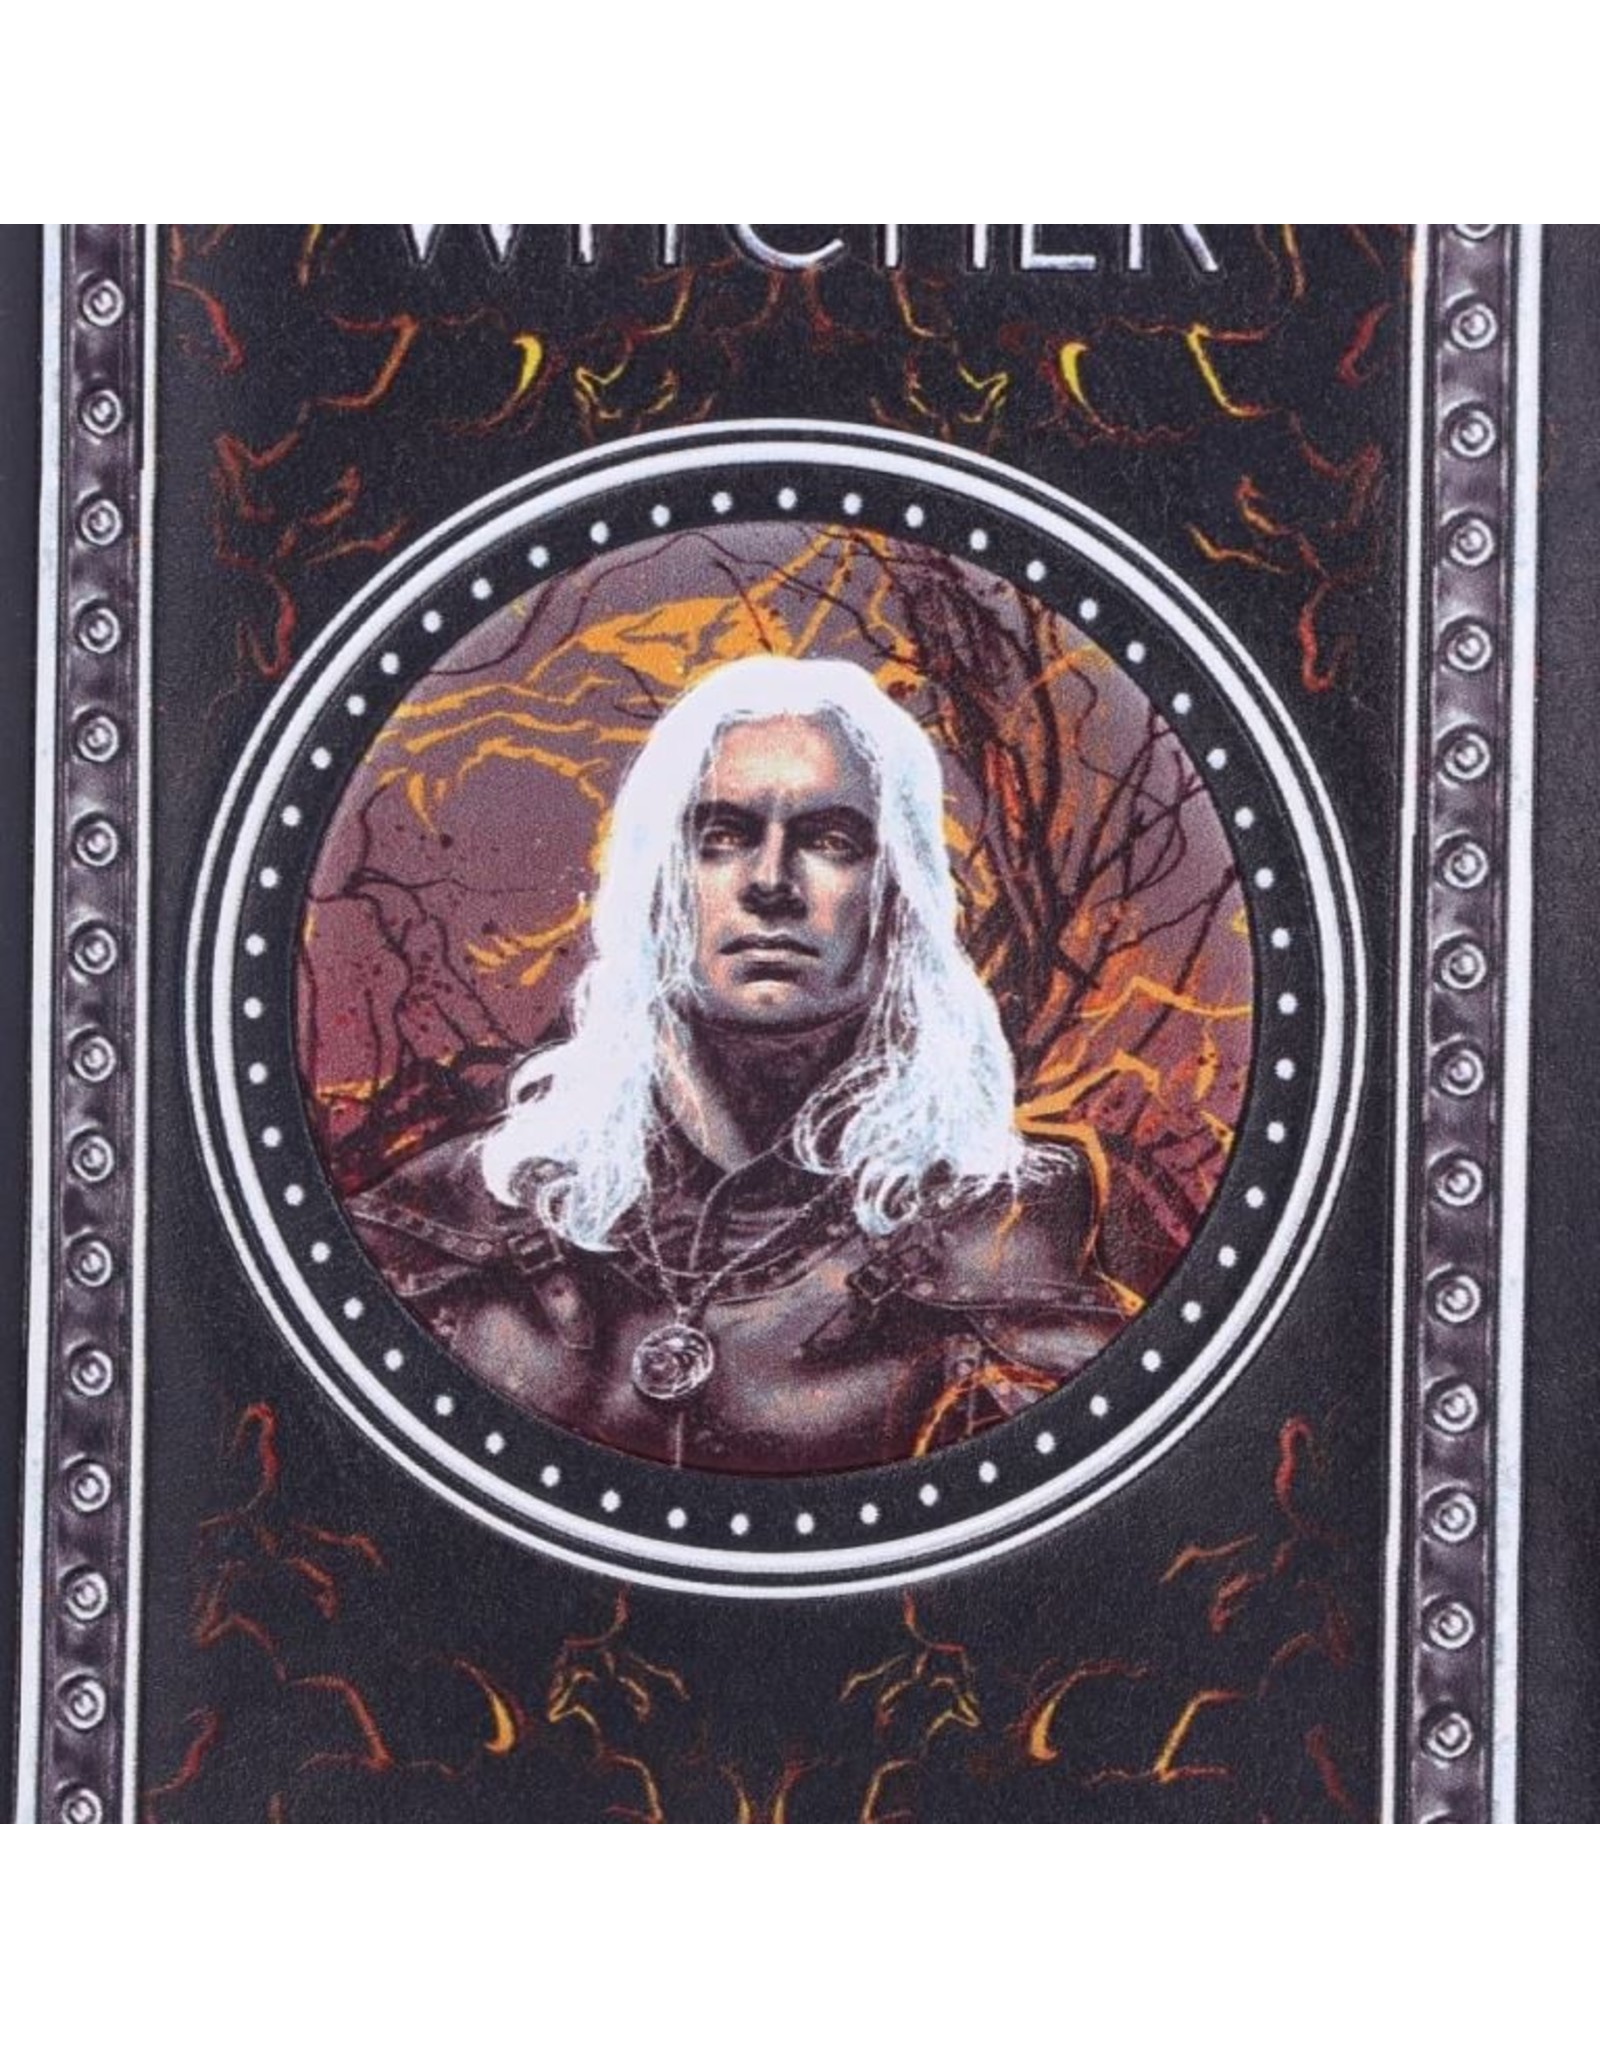 NemesisNow Gothic wallets and purses - The Witcher Geralt Embossed Purse Nemesis Now